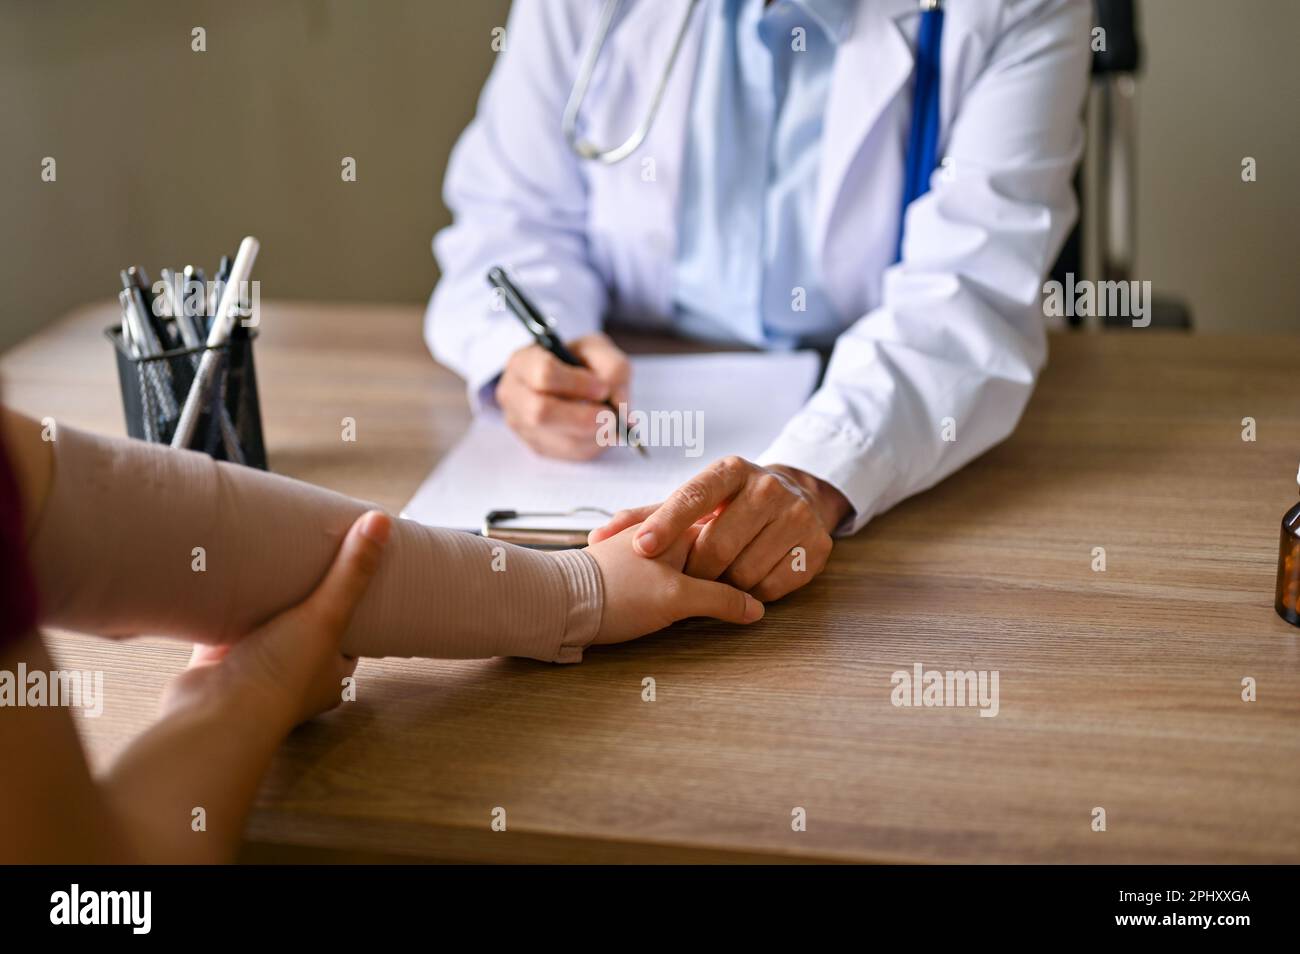 Close-up image of a professional female orthopedic doctor holding her patient hand to comfort and reassure during the meeting. Stock Photo